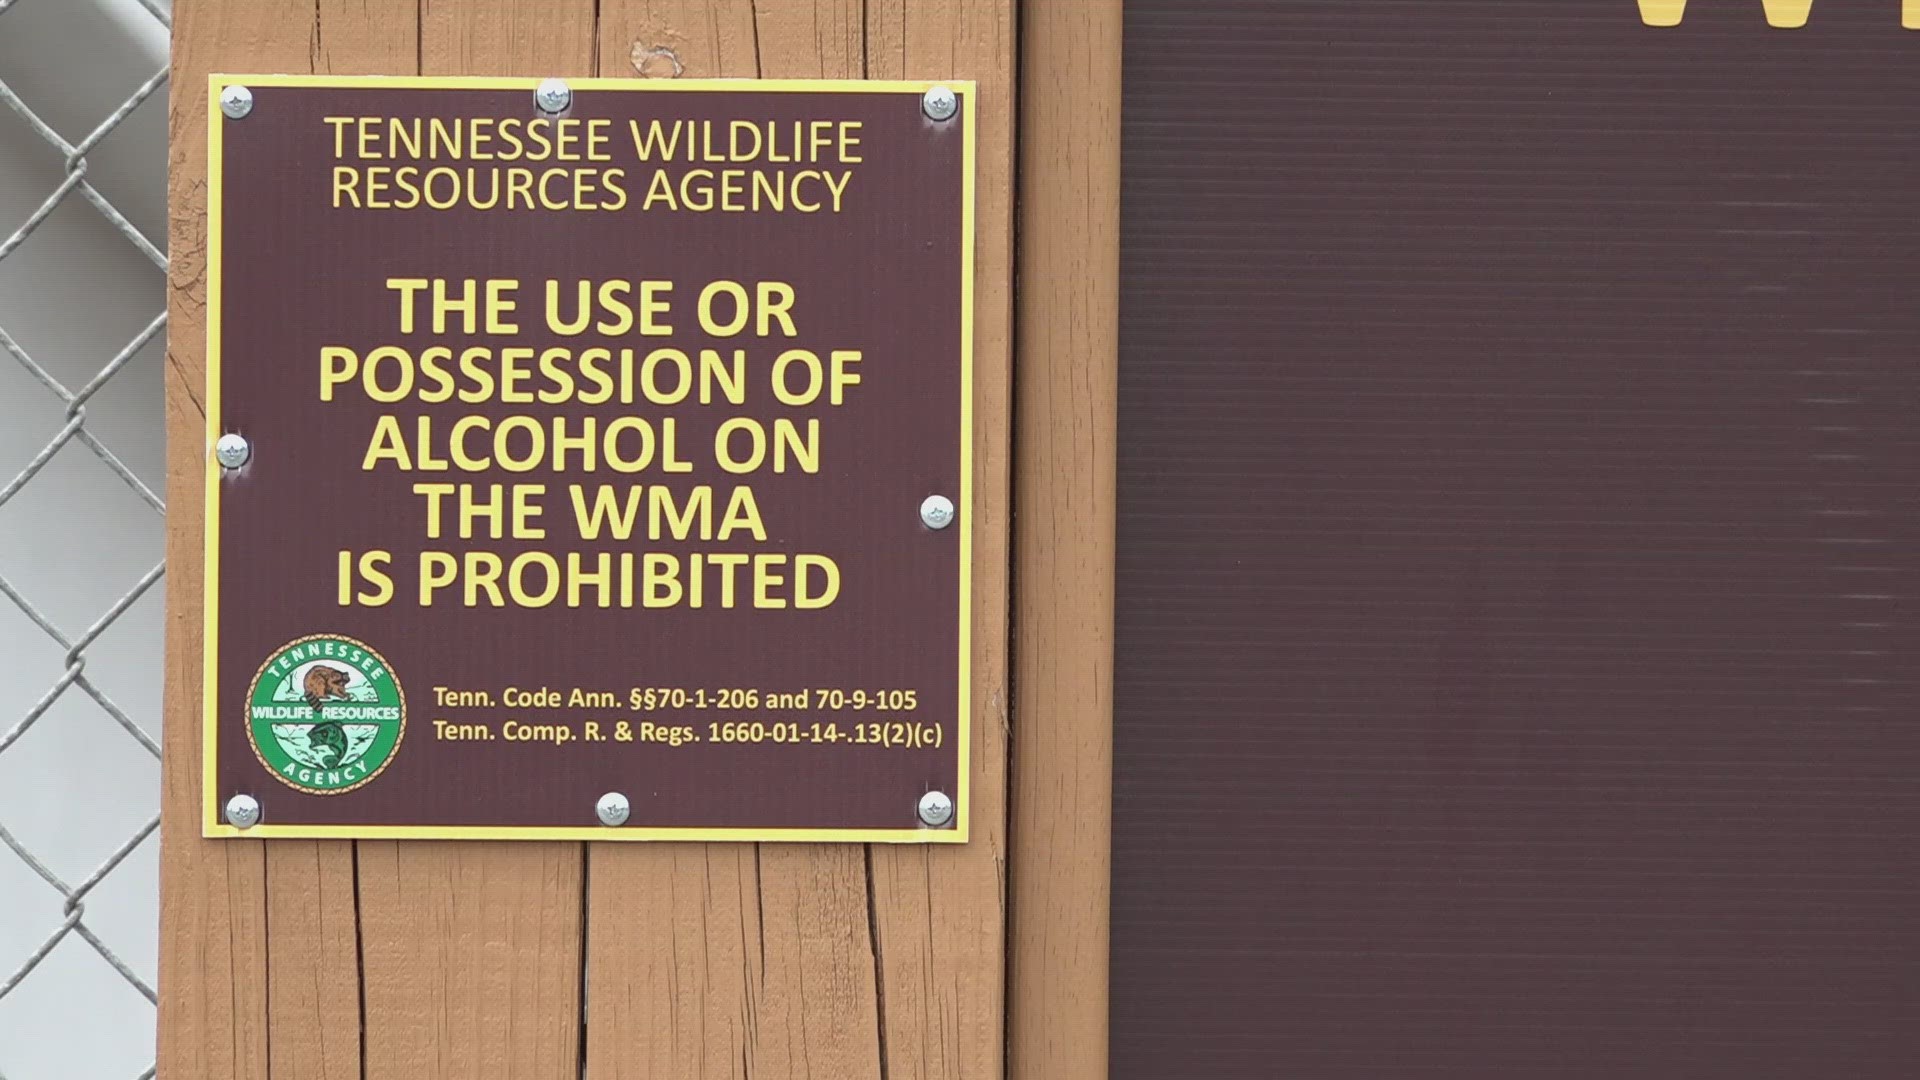 Starting April 15, people will not be allowed to have or drink alcohol across all of TWRA's wildlife management areas, except for in specific areas.